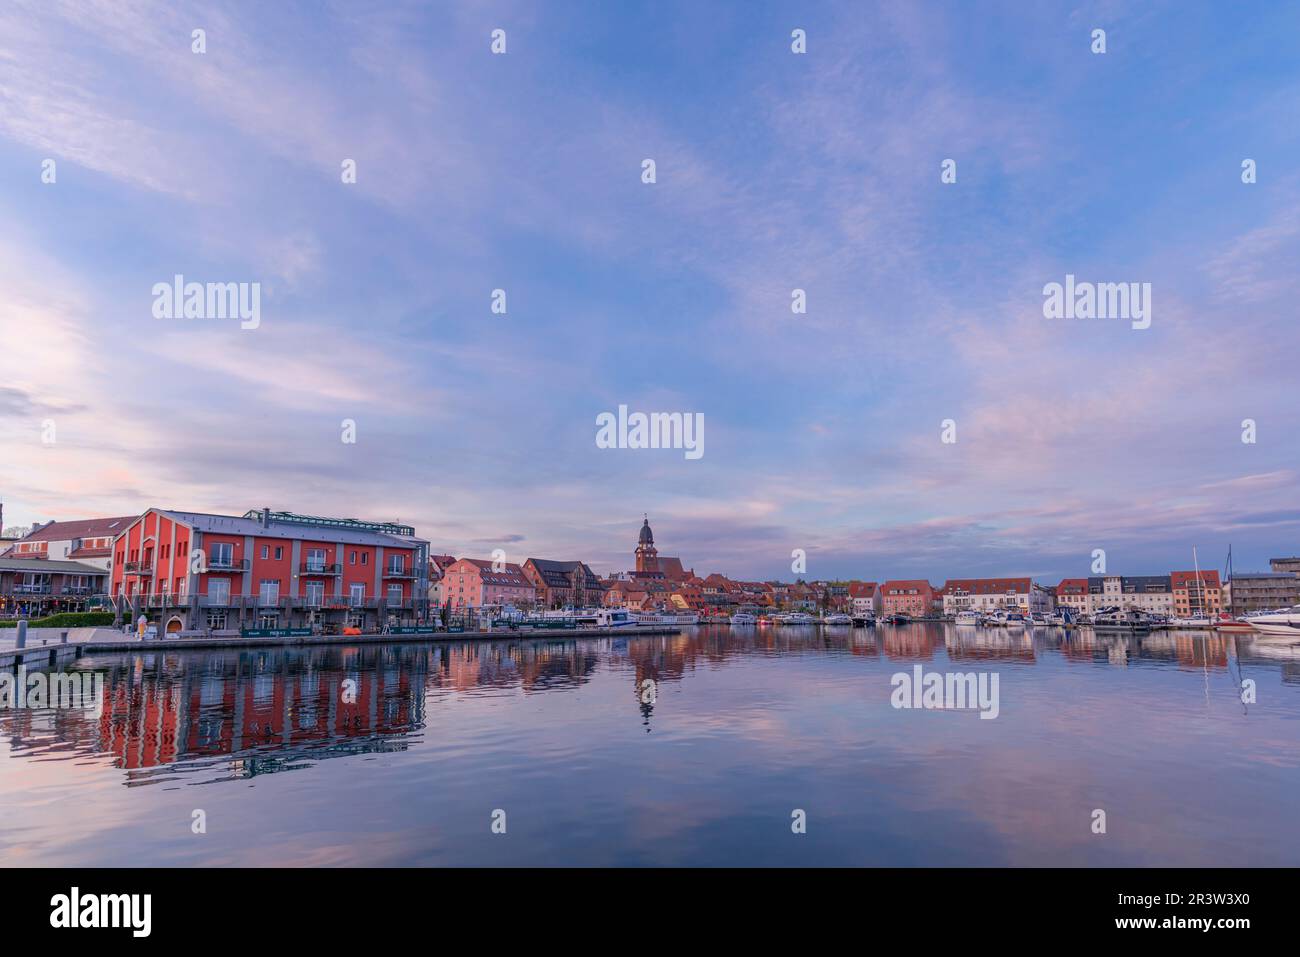 City harbour with motor boats, Waren, St. George's Church, panorama, evening light, sky, water reflection, old town, Mecklemburg Lake District Stock Photo